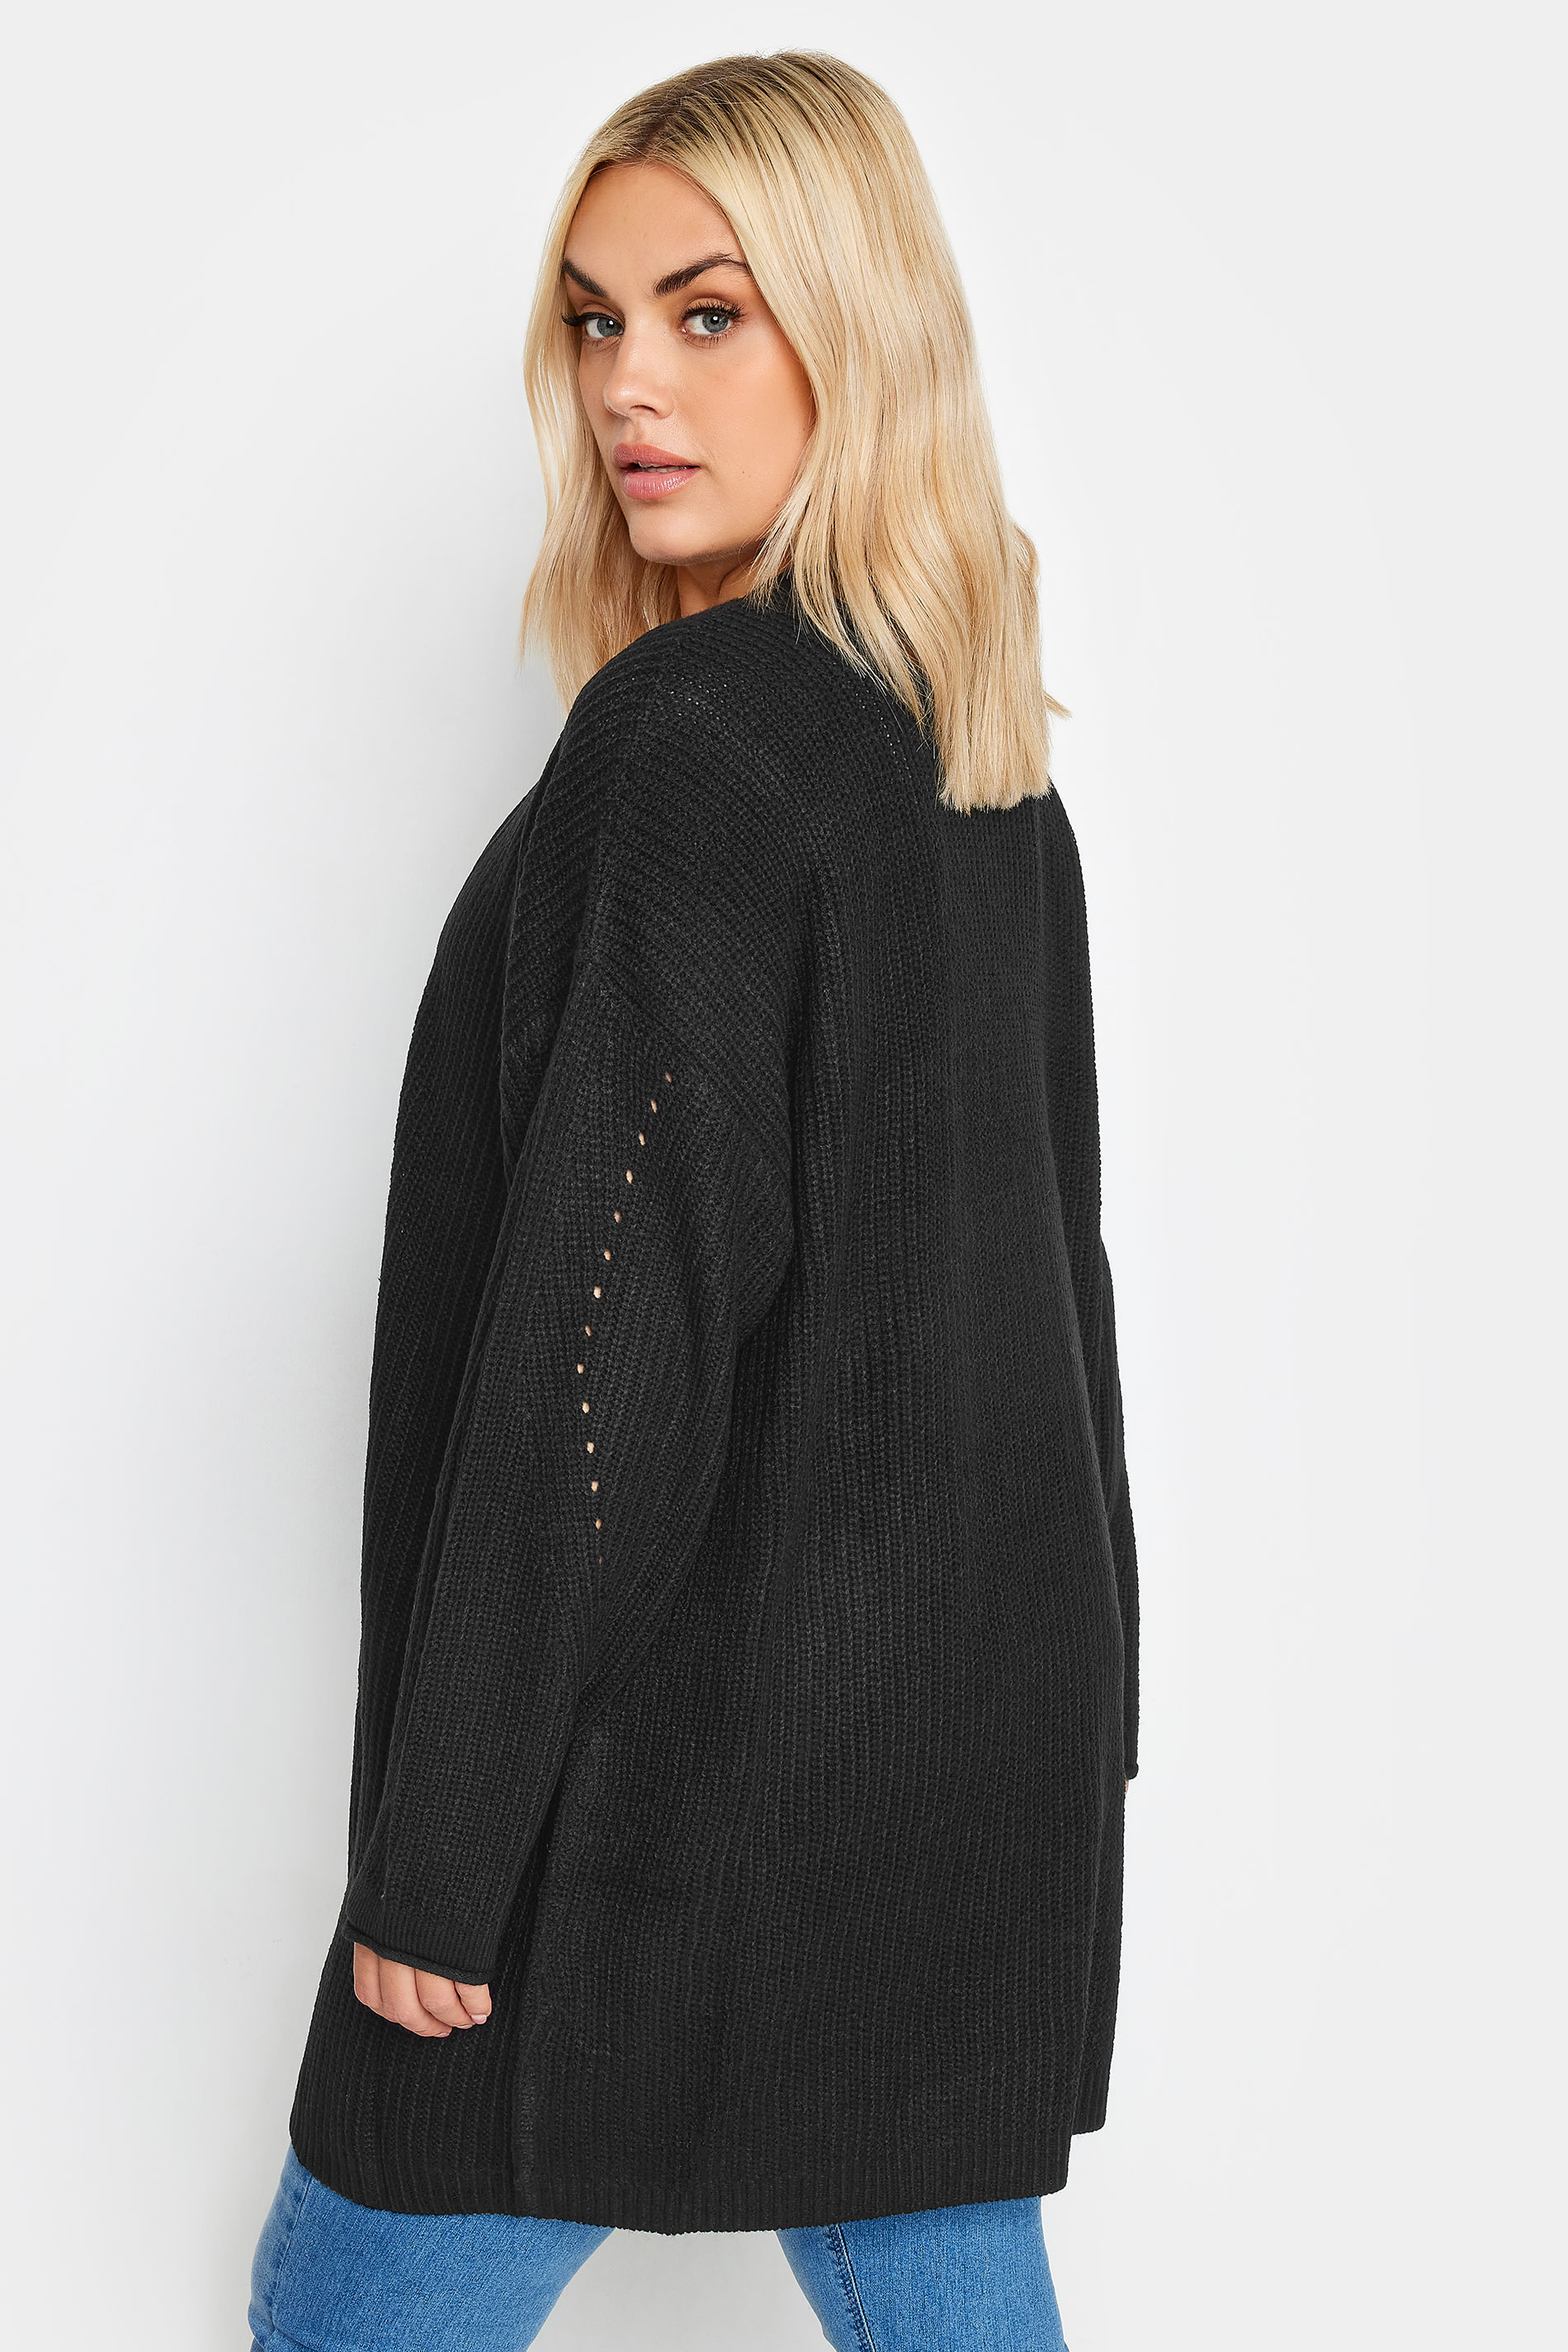 YOURS Plus Size Black Essential Knitted Cardigan | Yours Clothing  3